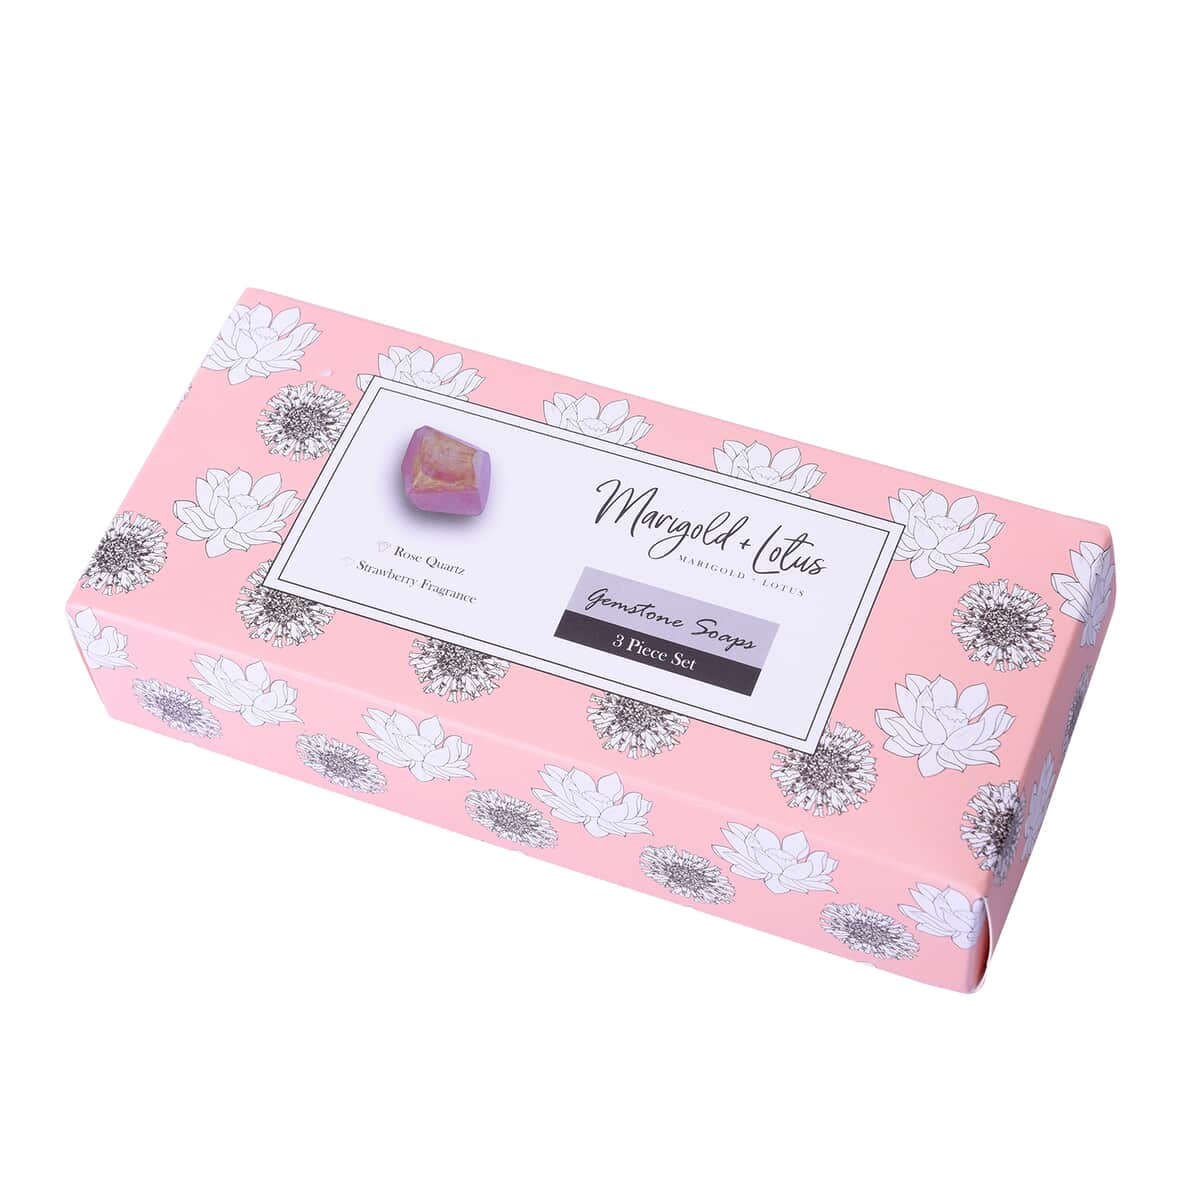 Marigold + Lotus 3pc Set Rose Quartz Soap Rock with Crystal Infused and Strawberry Fragrance image number 4